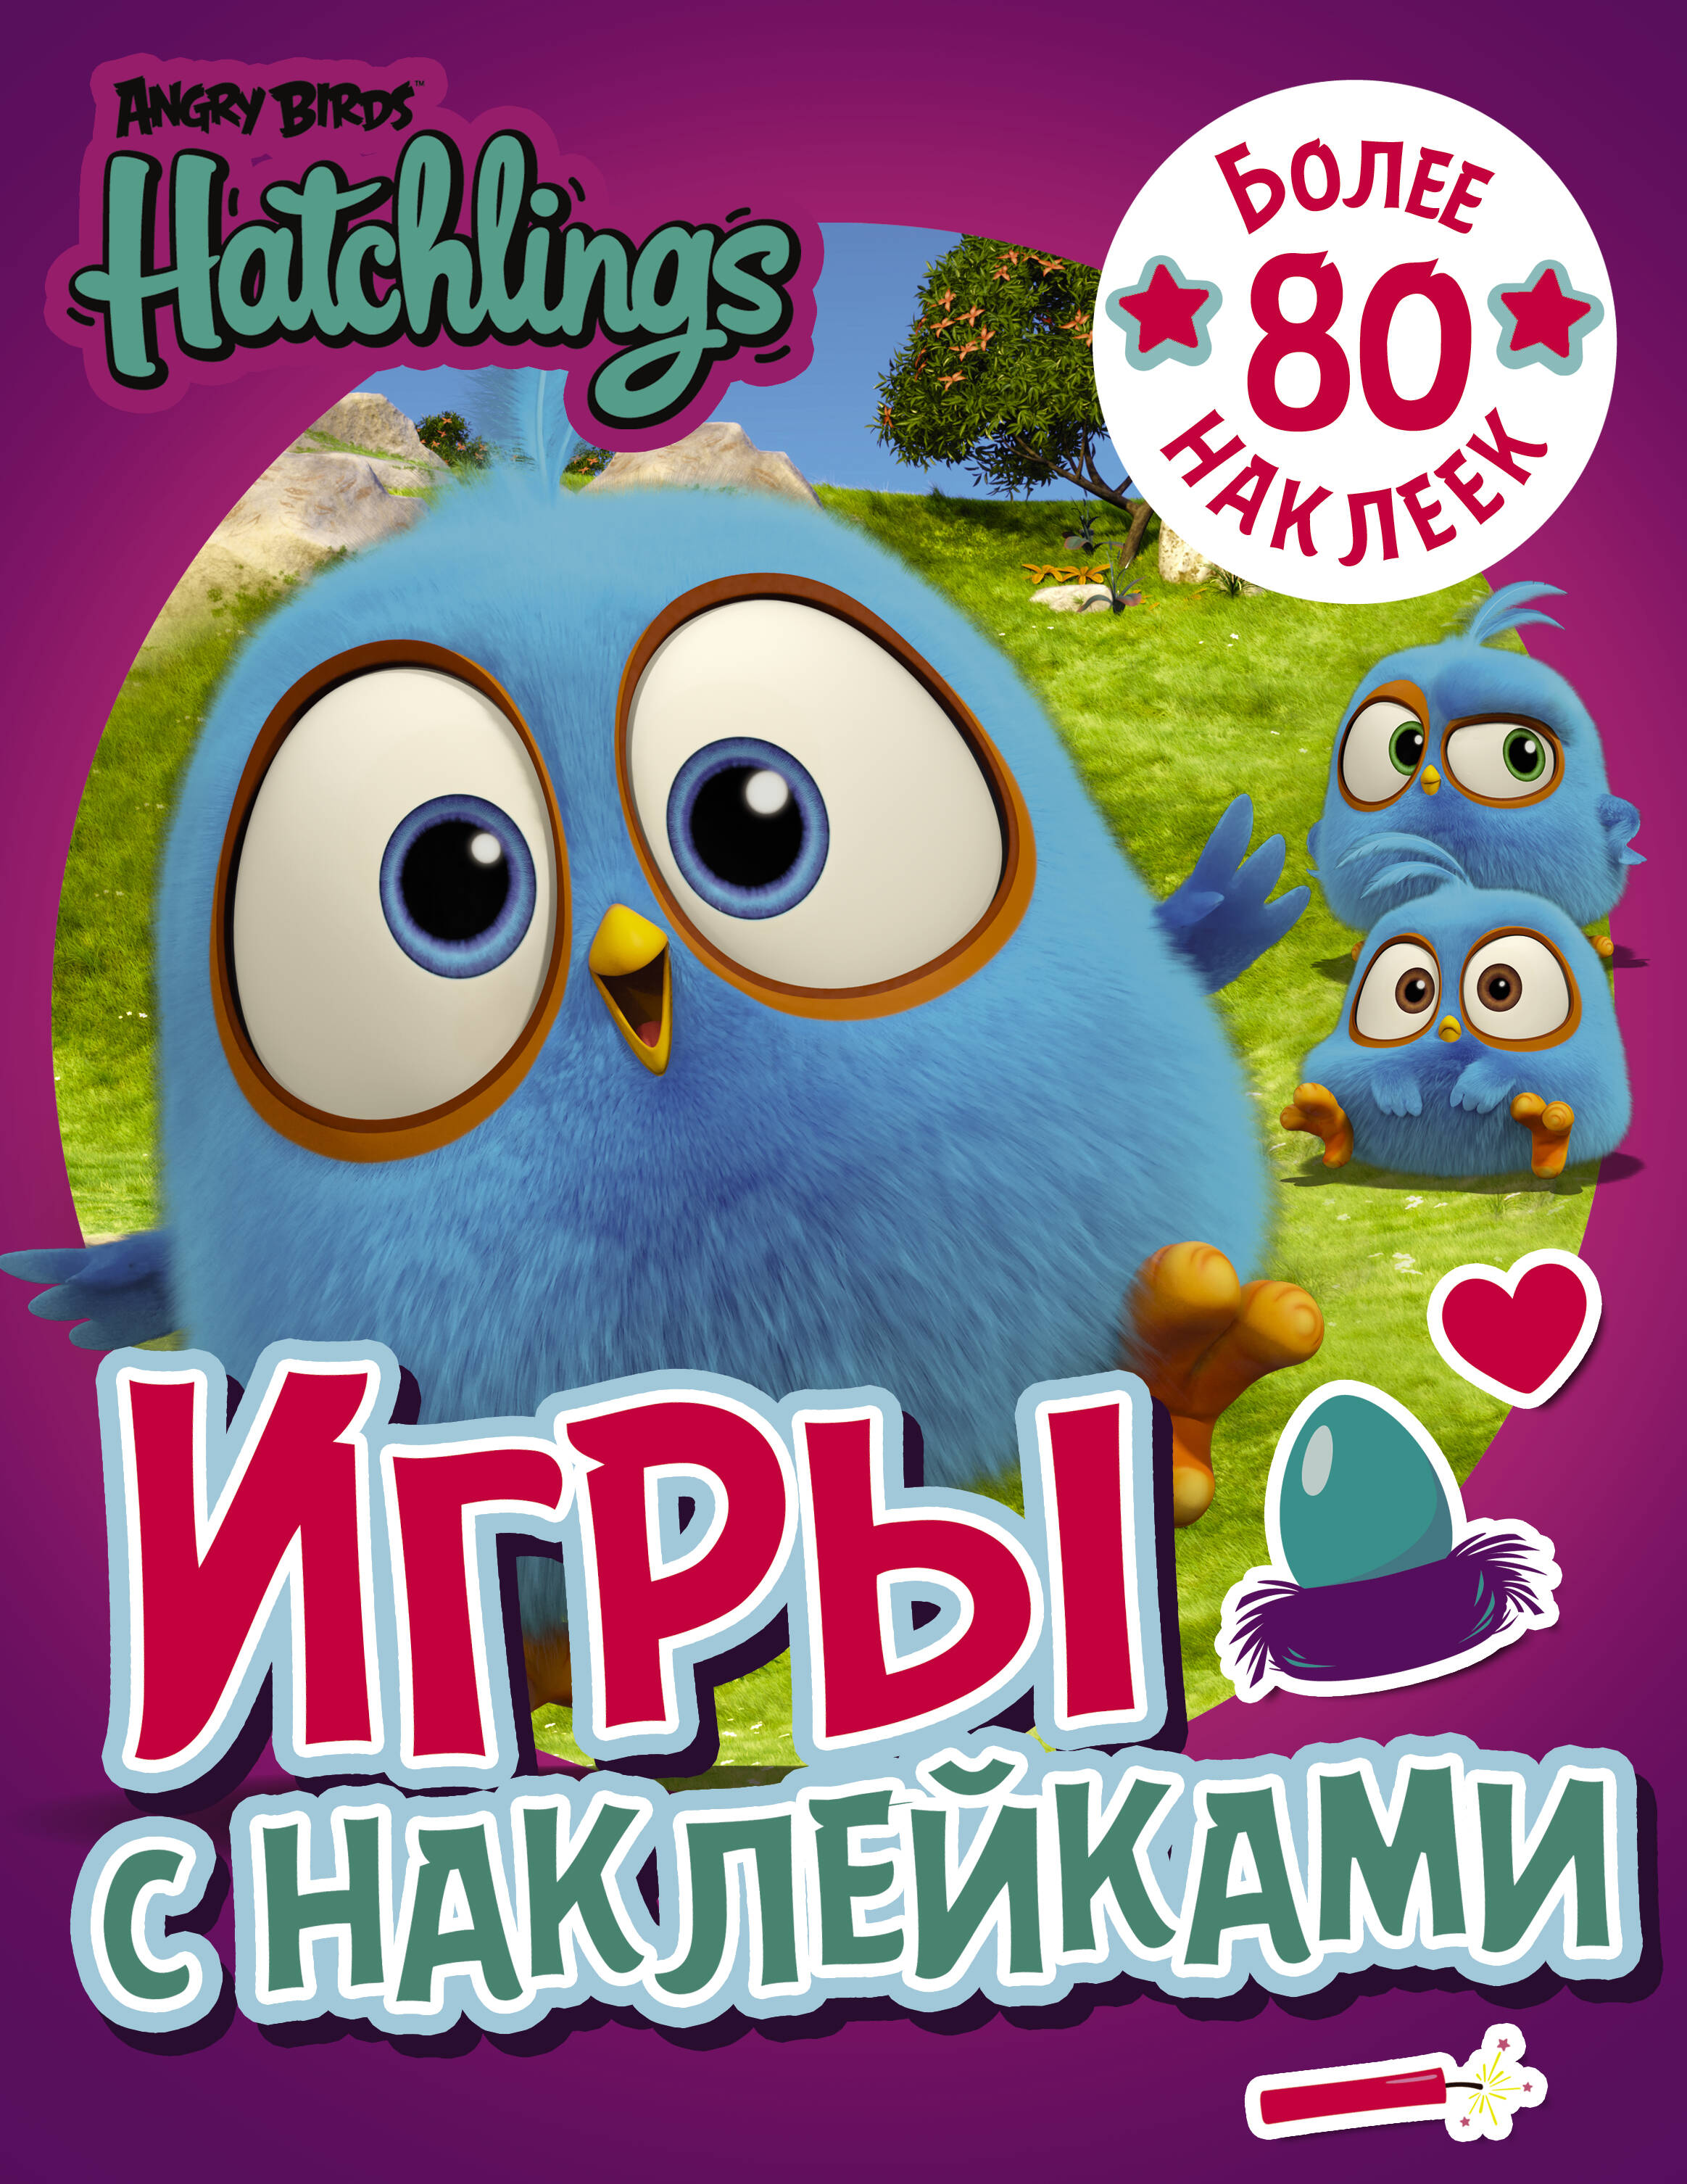  Angry Birds. Hatchlings. Игры с наклейками (с наклейками) - страница 0